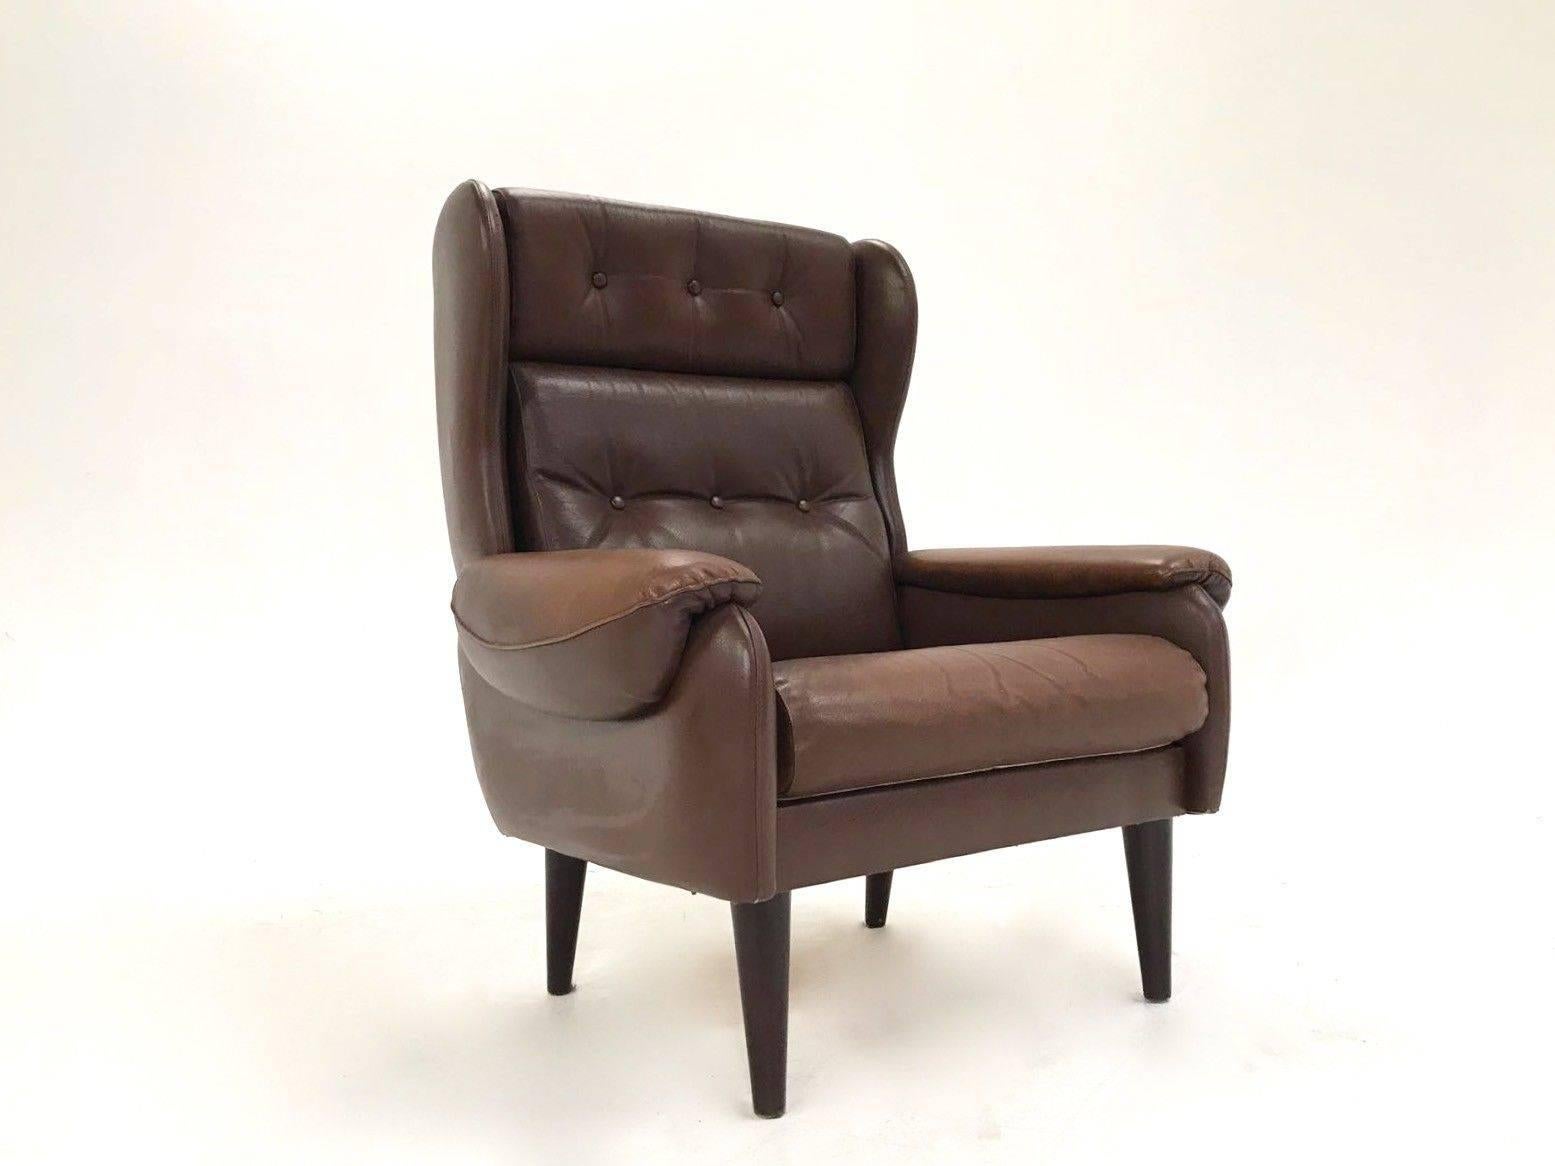 A beautiful Danish brown leather high back armchair, this would make a stylish addition to any living or work area. The chair has a high buttoned back and padded armrests for enhanced comfort. A striking piece of classic Scandinavian